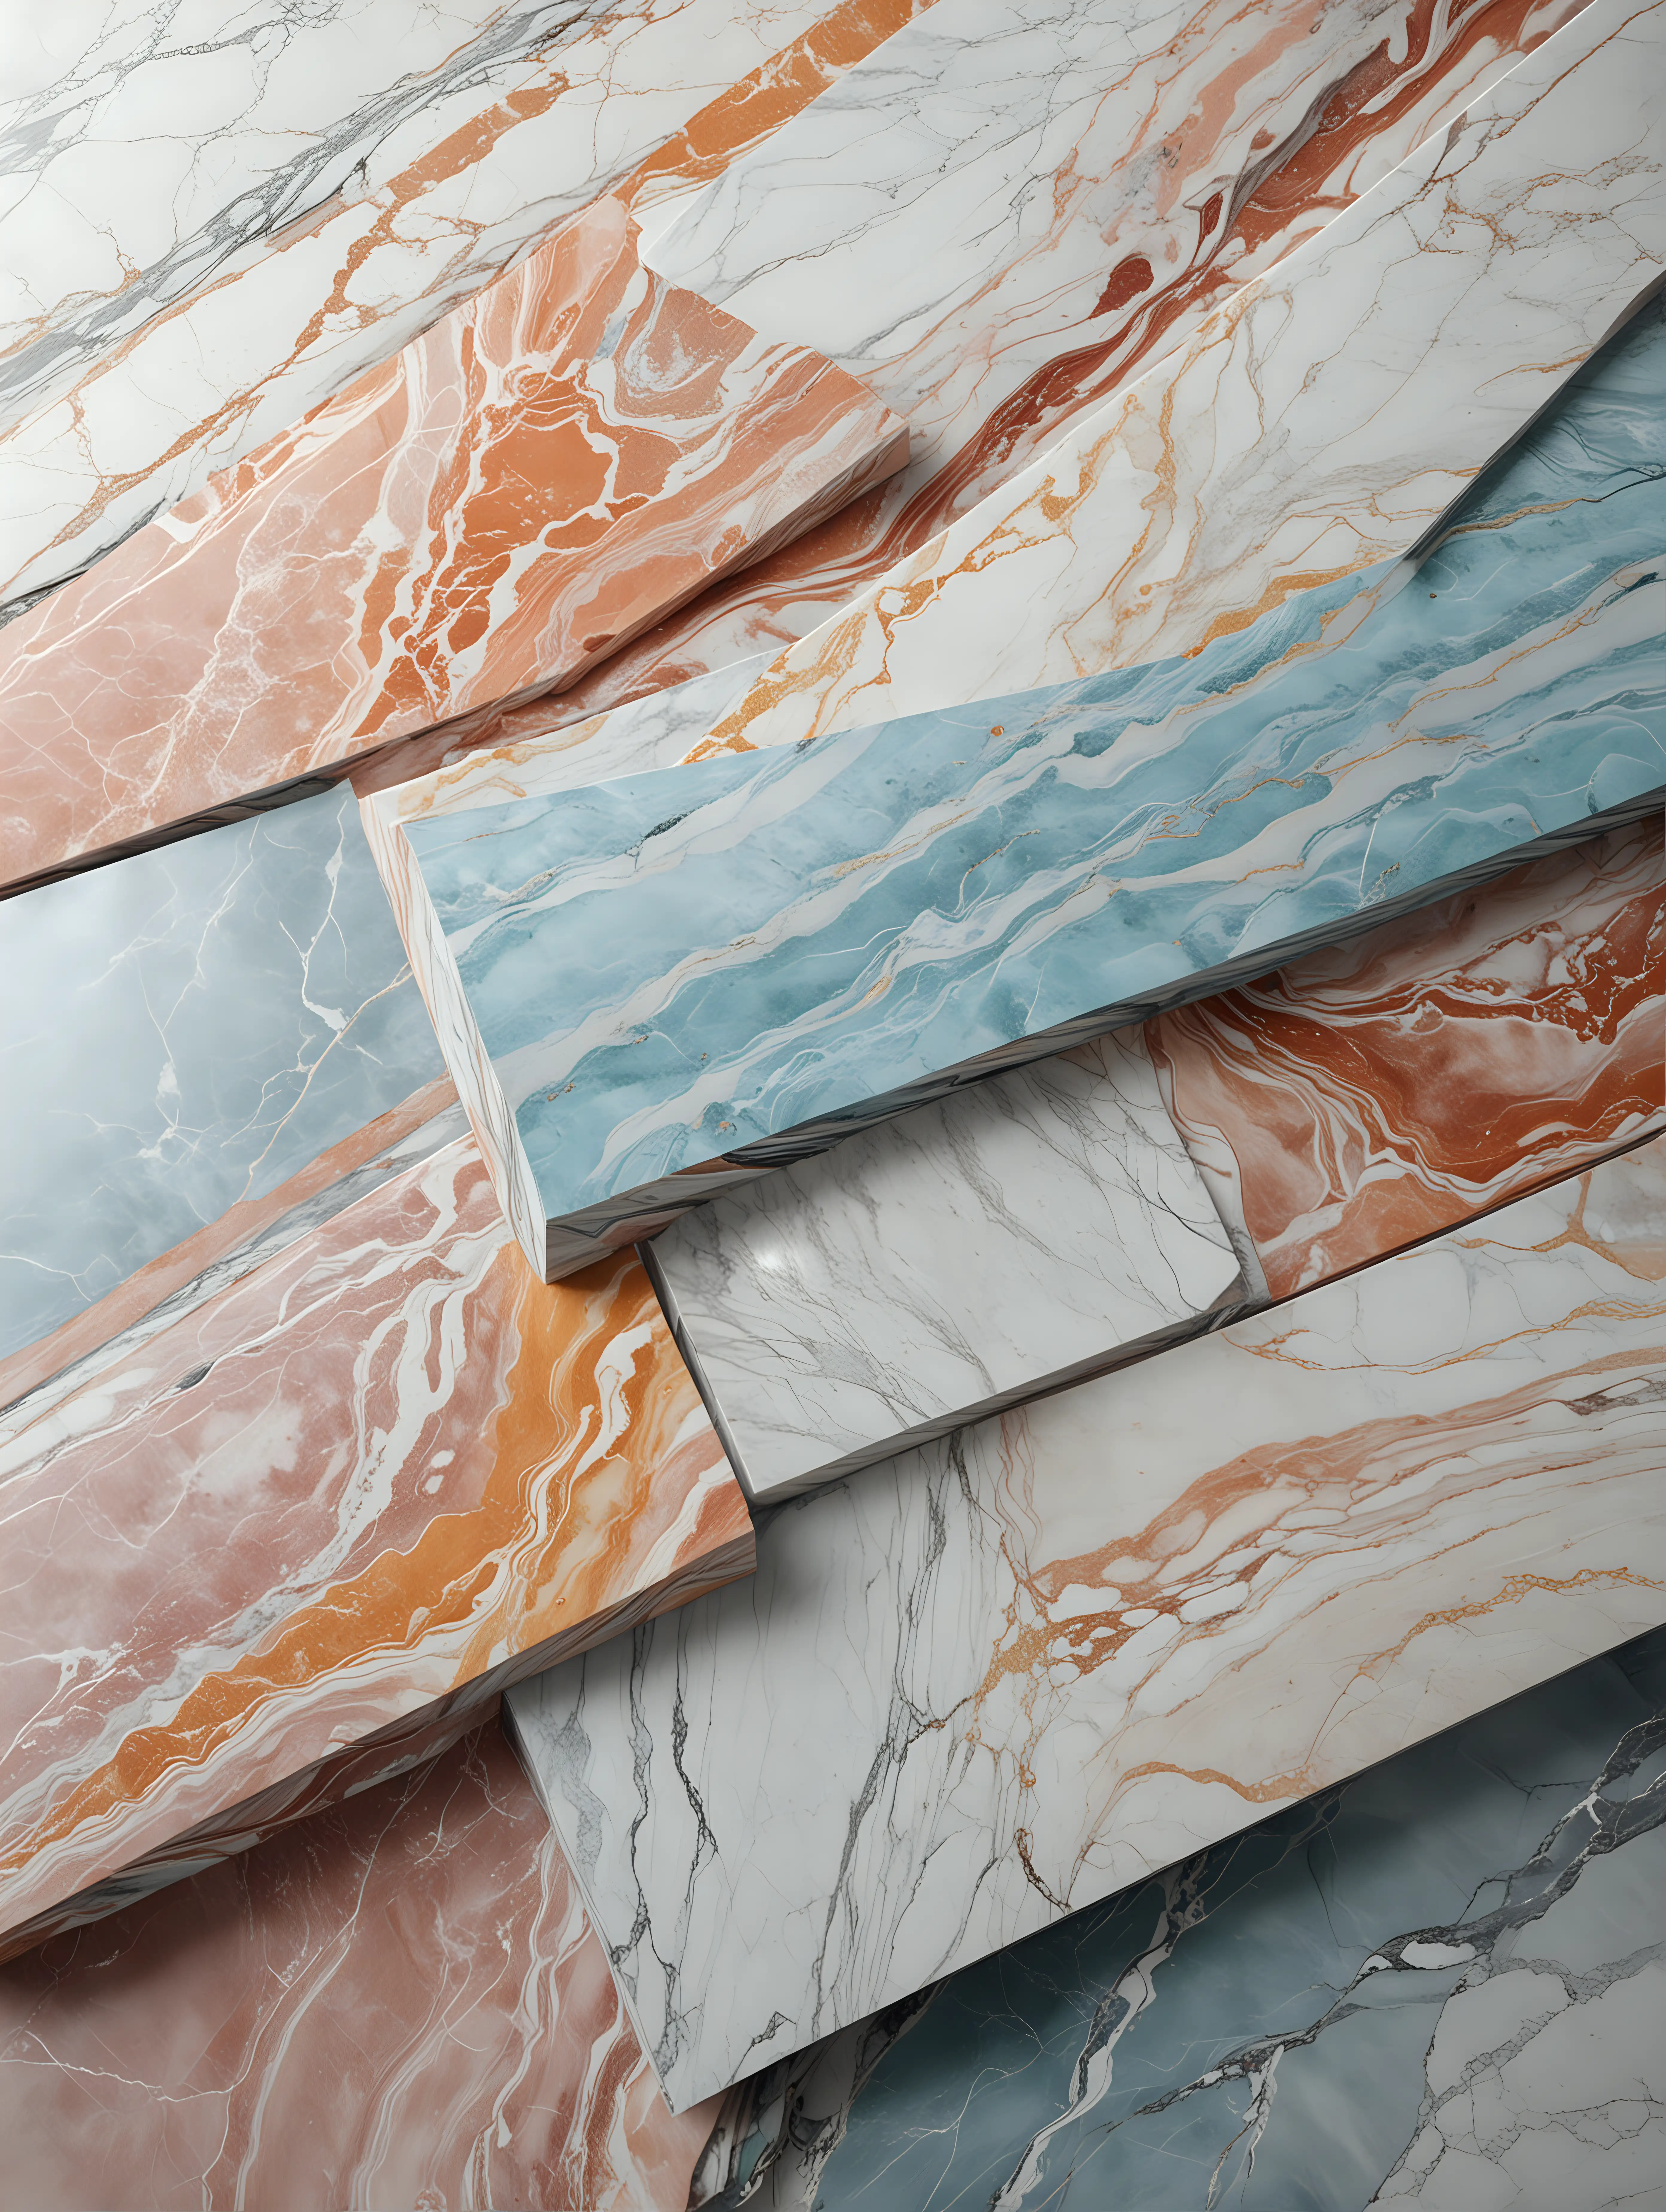 Stacked Hyperrealistic Marble Slabs in Multicolored Array